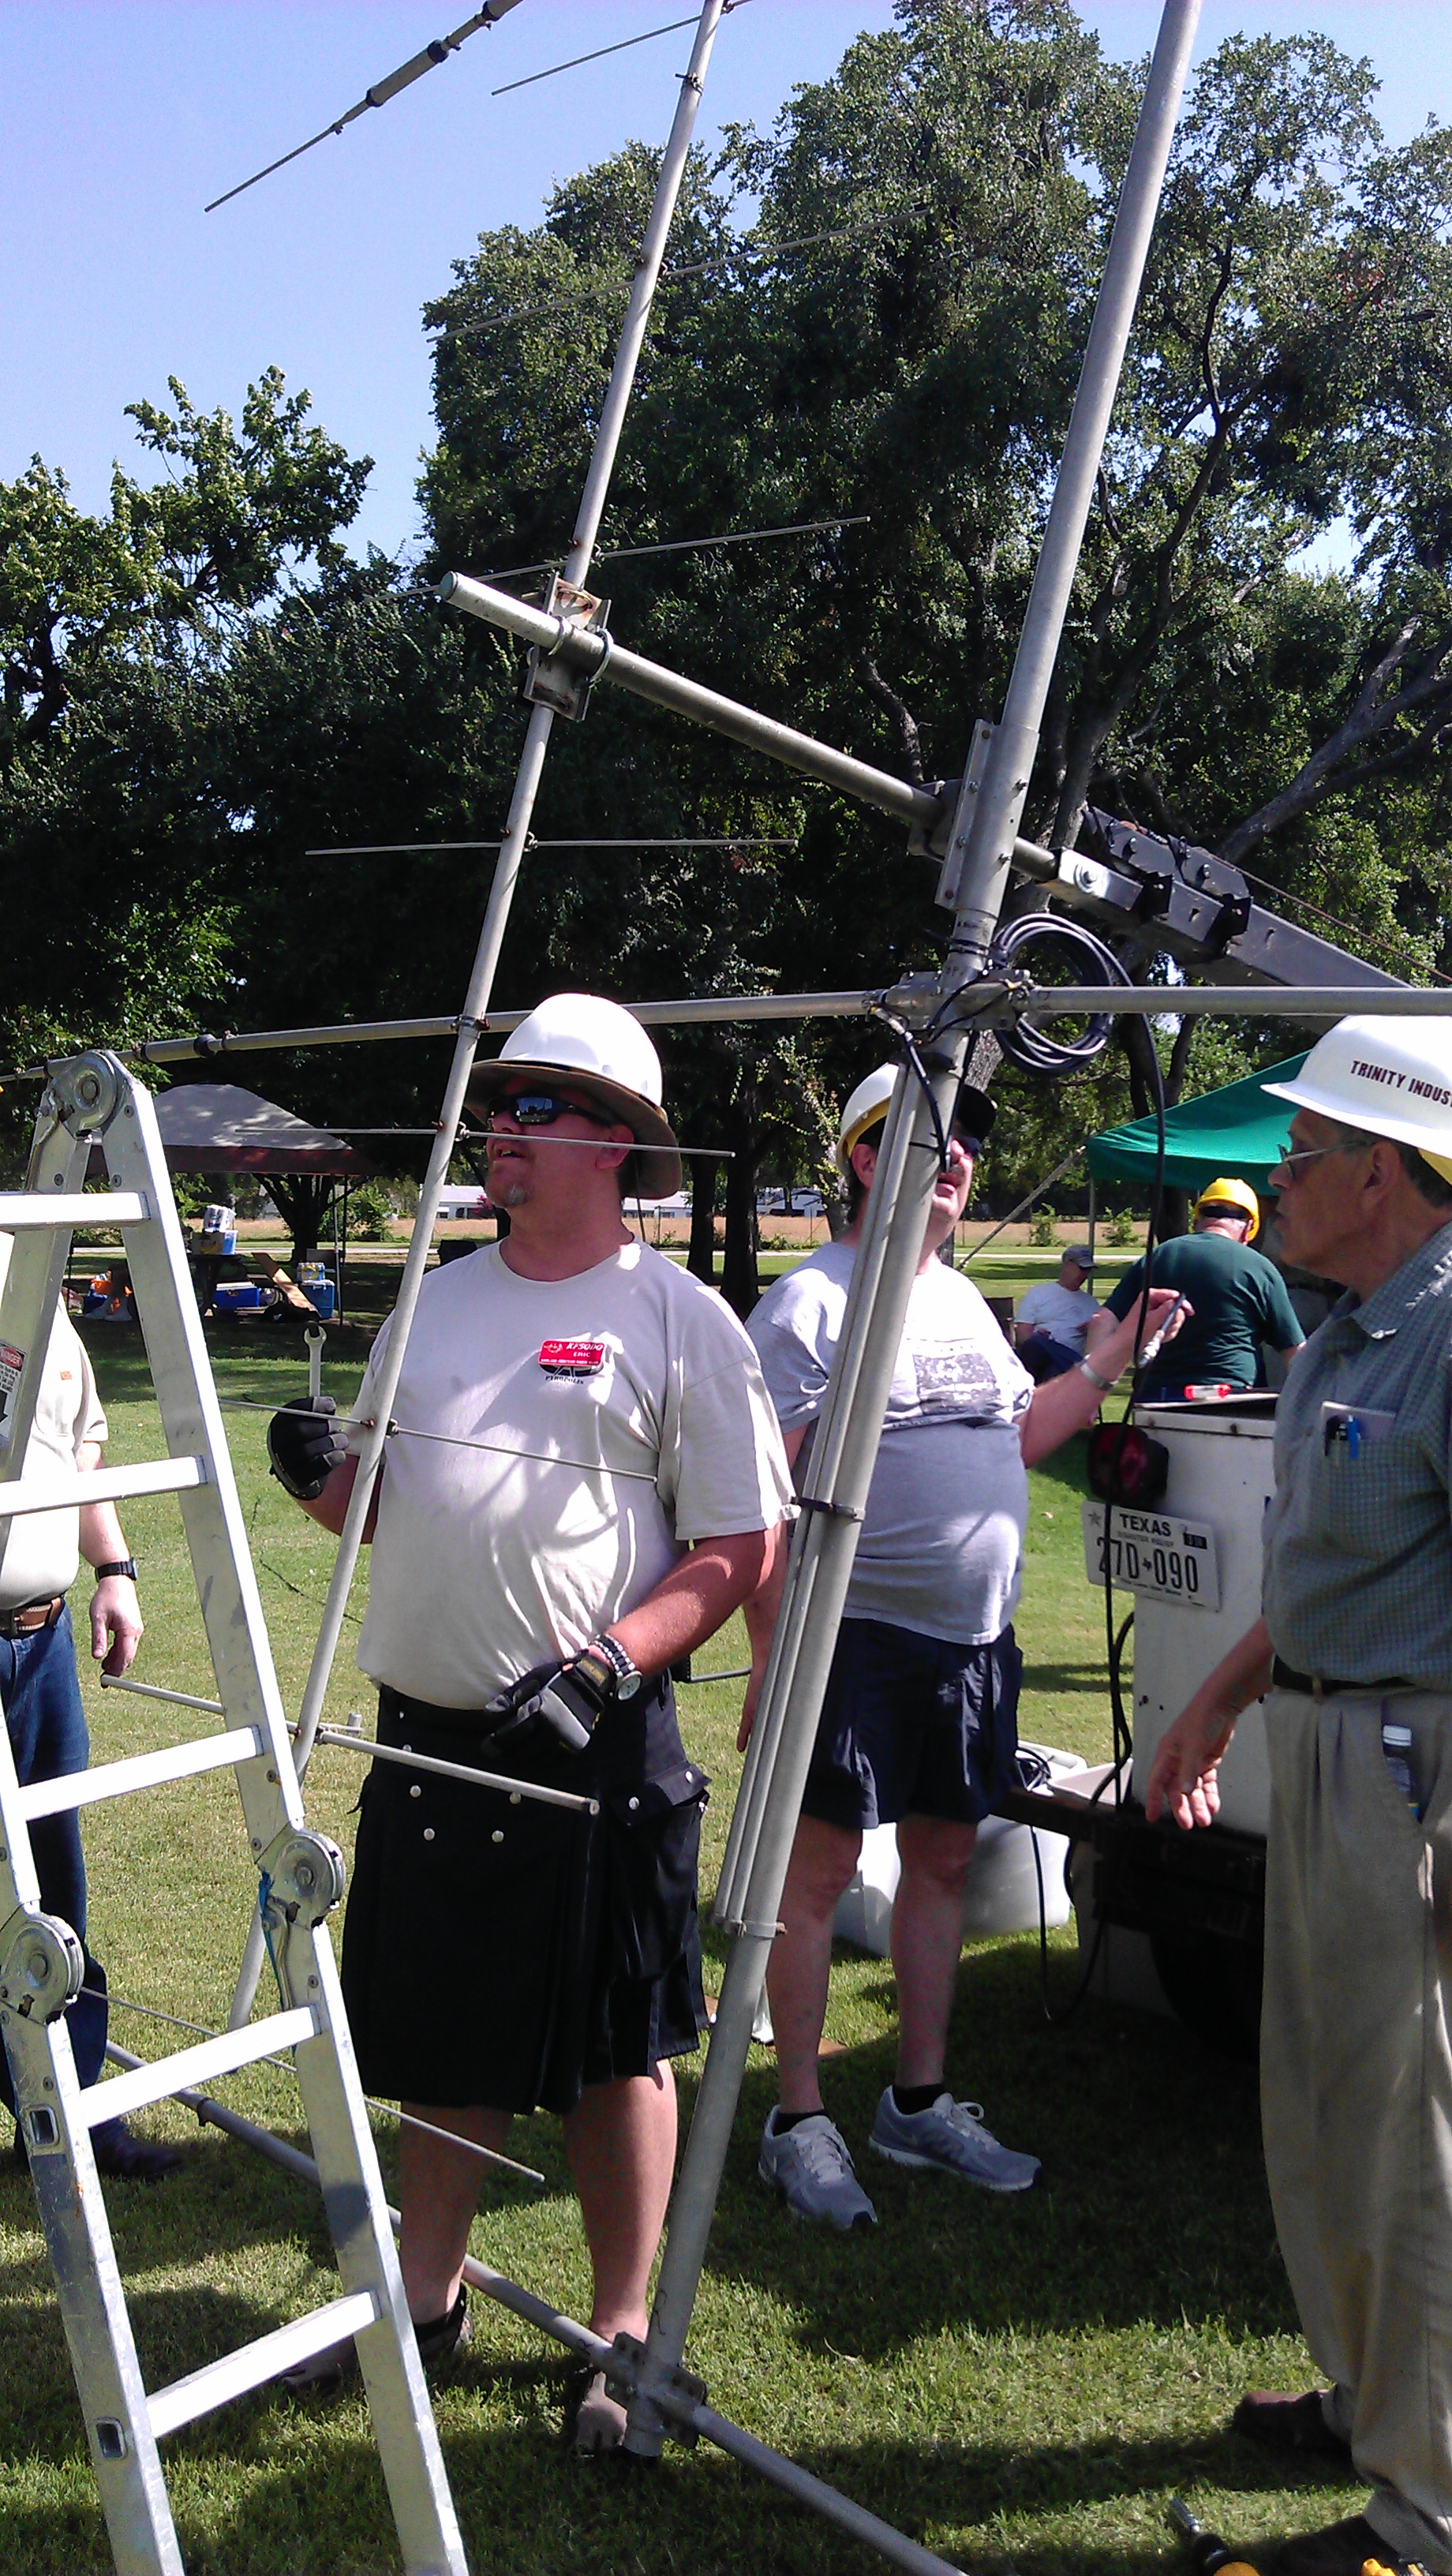 Williams' Belly, Eric, Wayne, Bob, and Jim getting the primary antenna ready